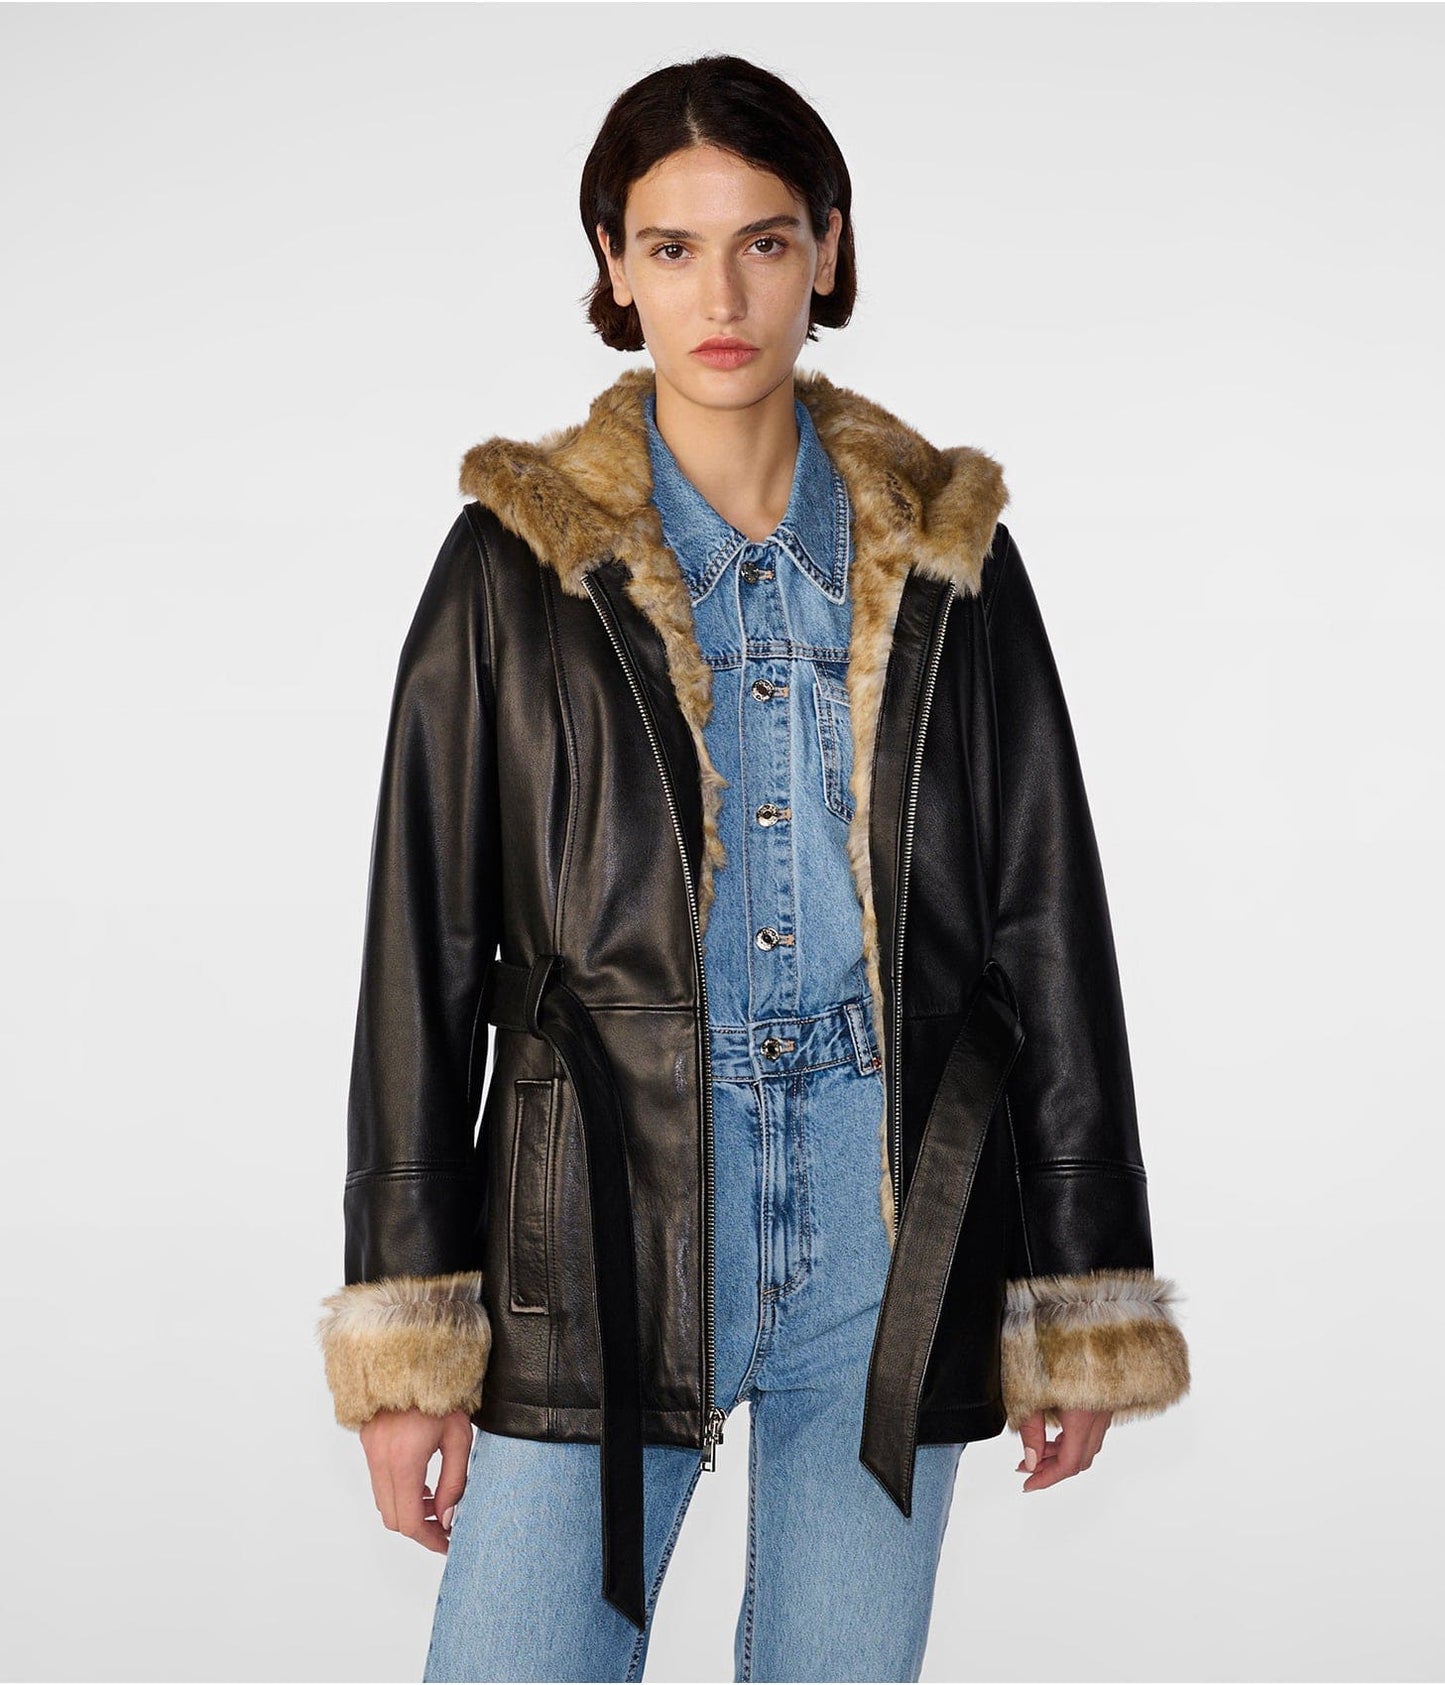 Women's Shearling Leather Jacket In Classic Black